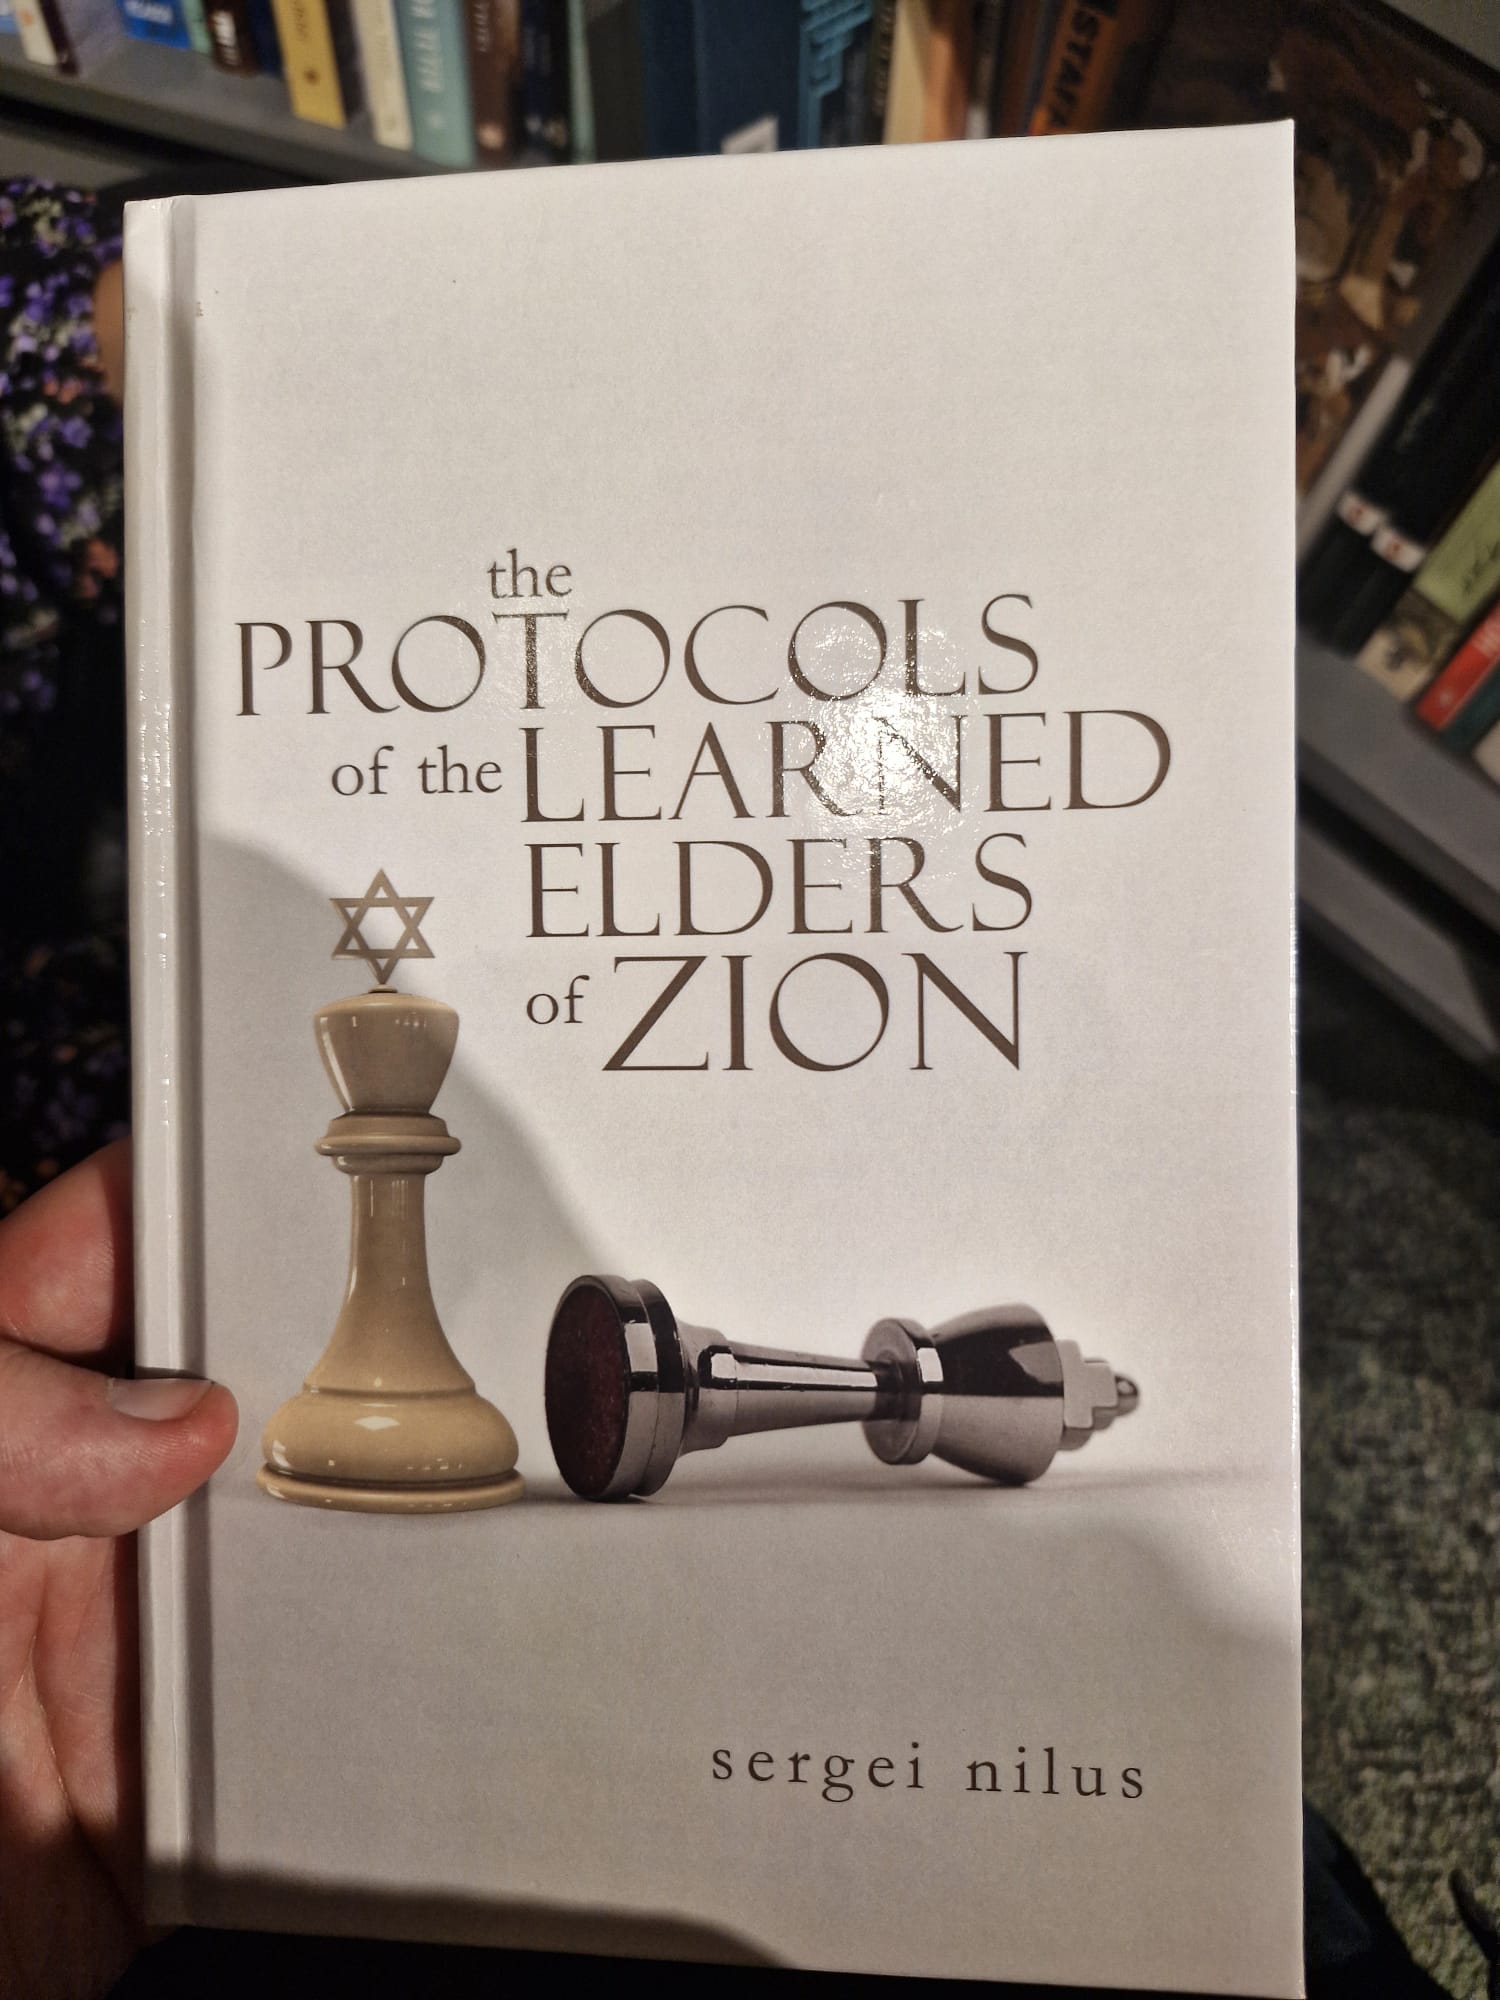 “The Protocols of the Elders of Zion” was removed from Waterstones’ range following a customer complaint